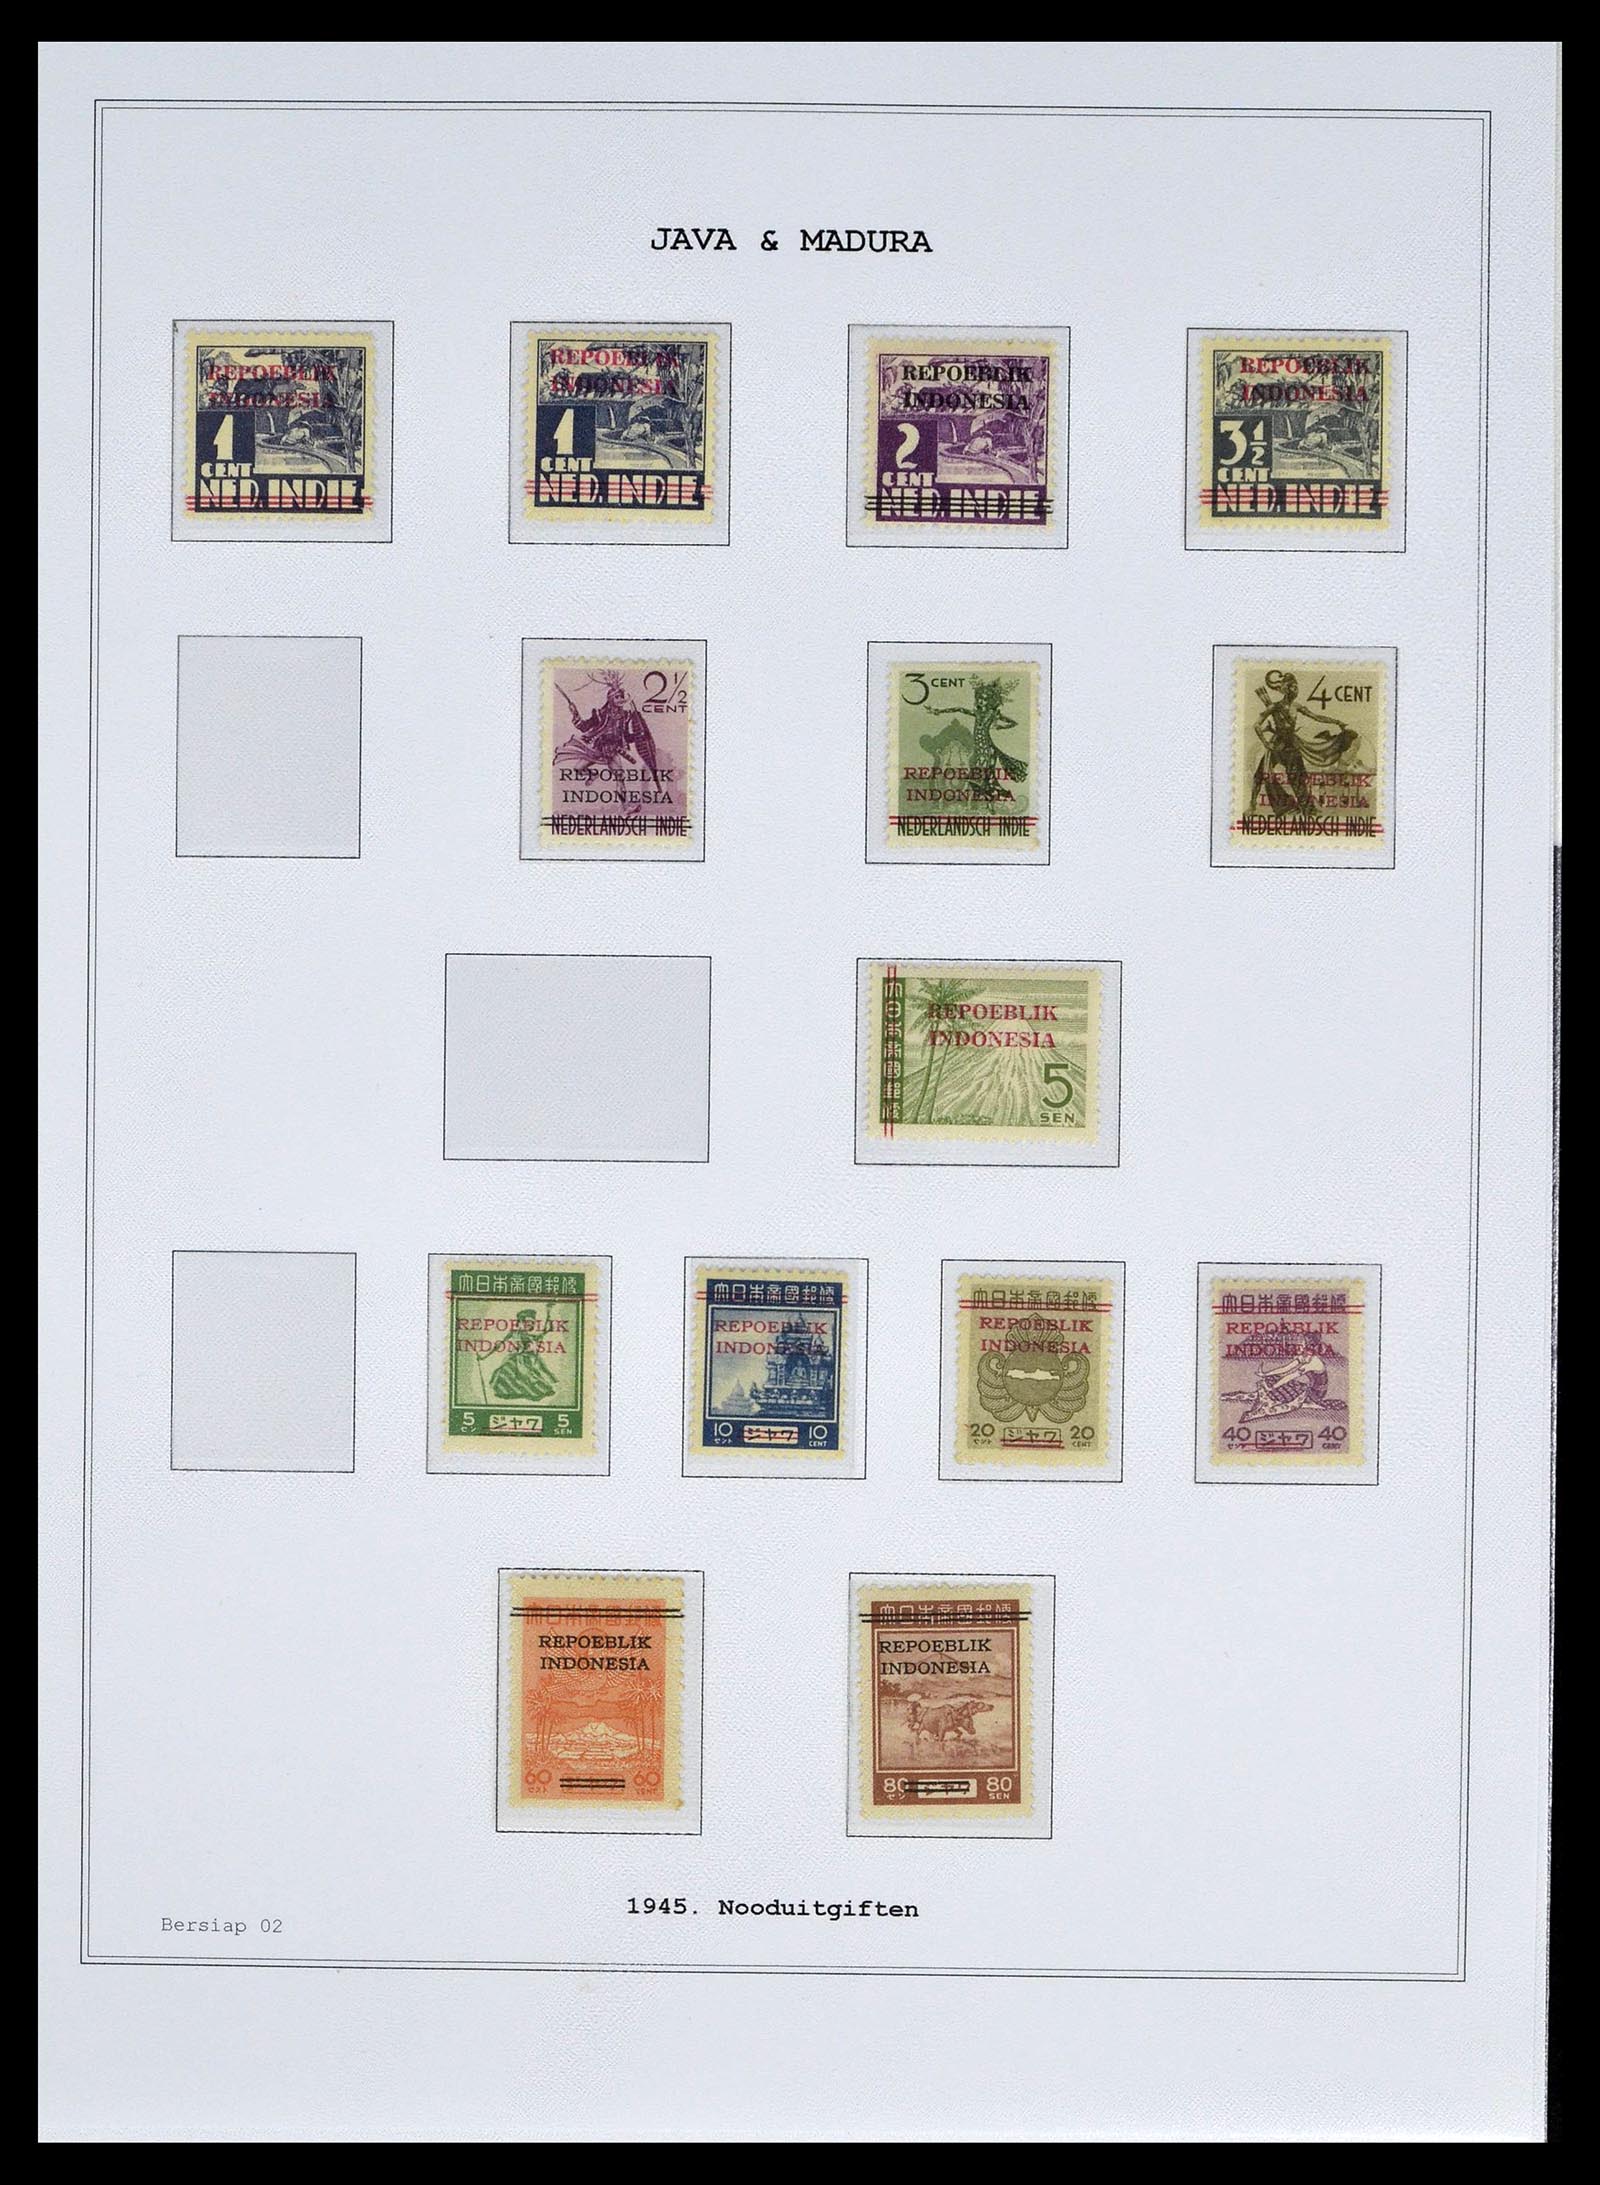 39026 0084 - Stamp collection 39026 Dutch east Indies and Suriname 1864-1975.